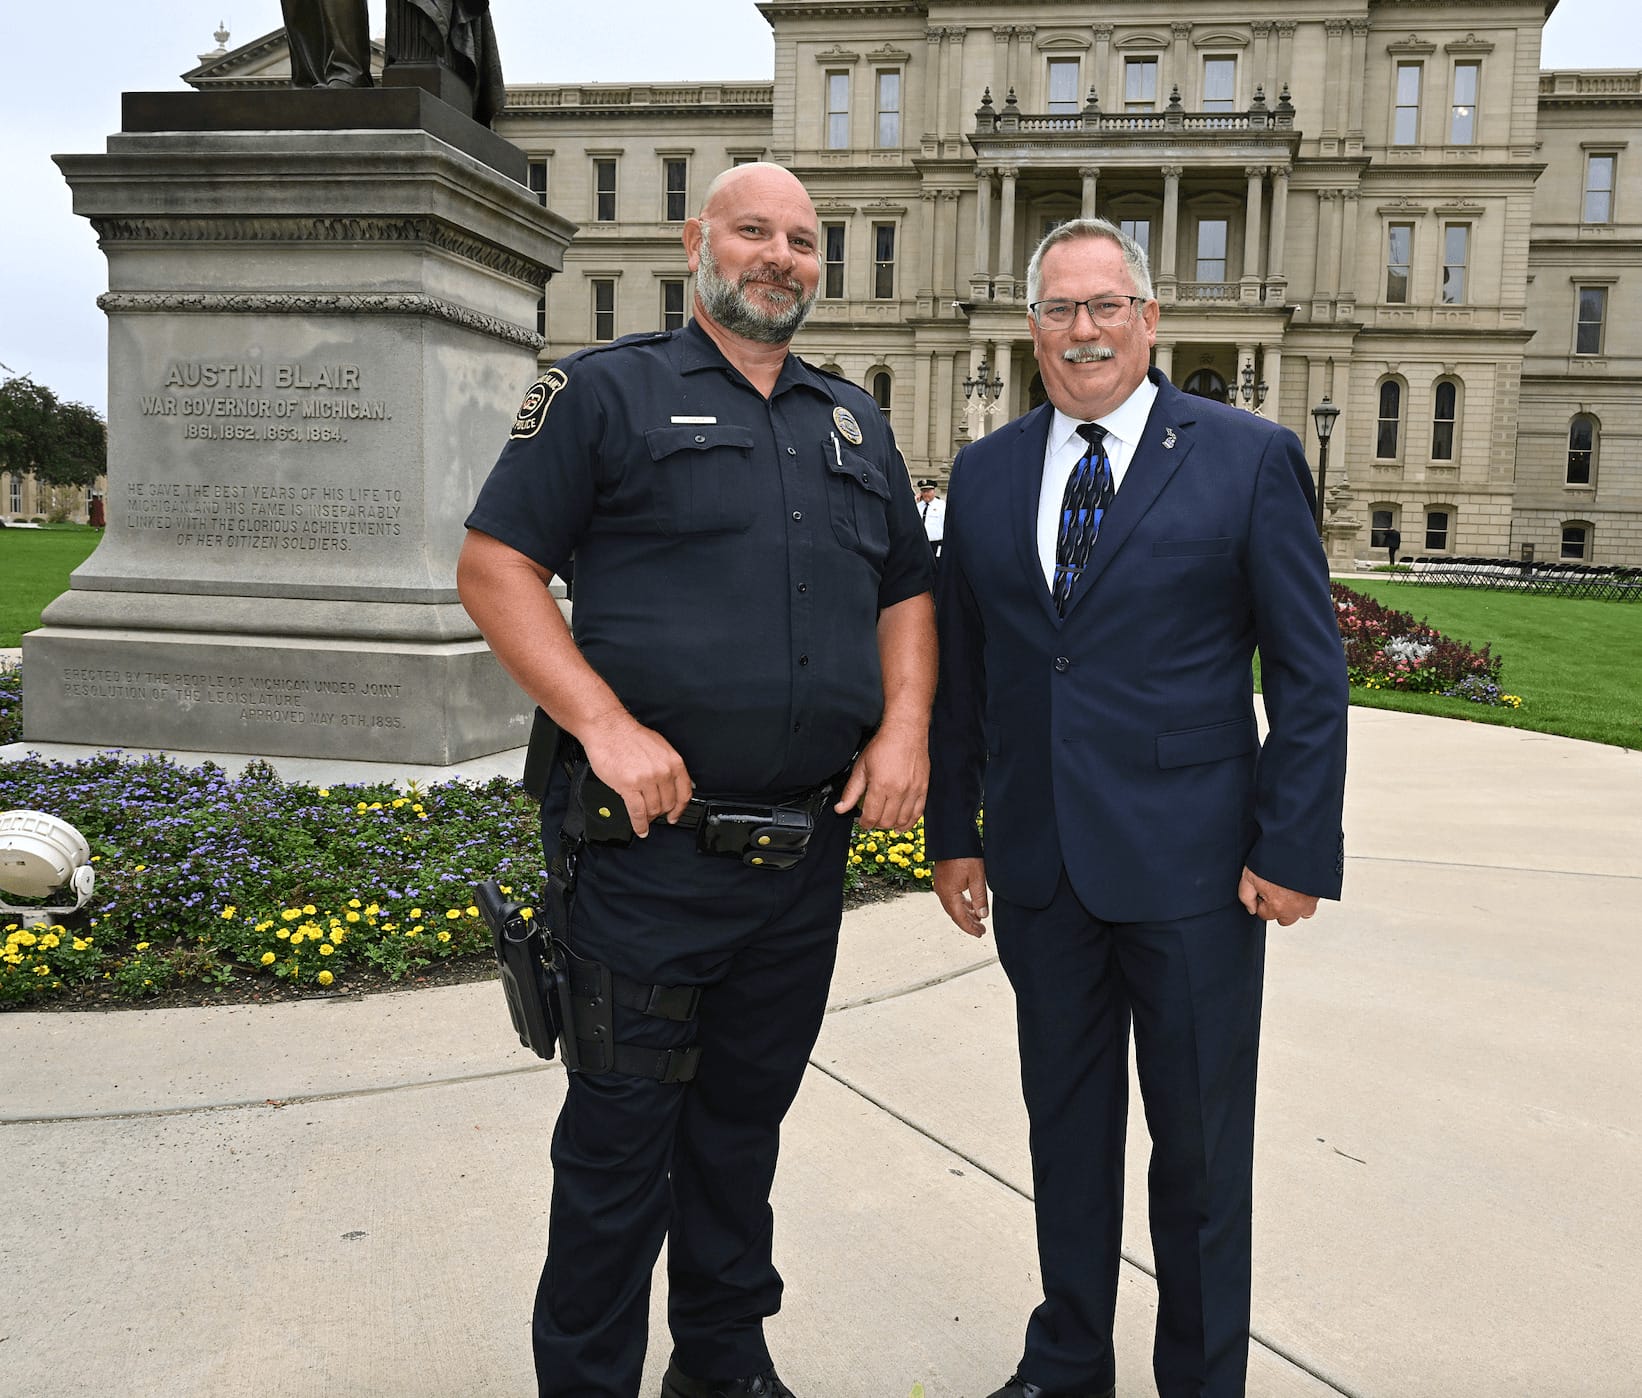 John Graver and Rep. Martin posing outside of the MI state capitol building after the 9/11 Memorial Celebration